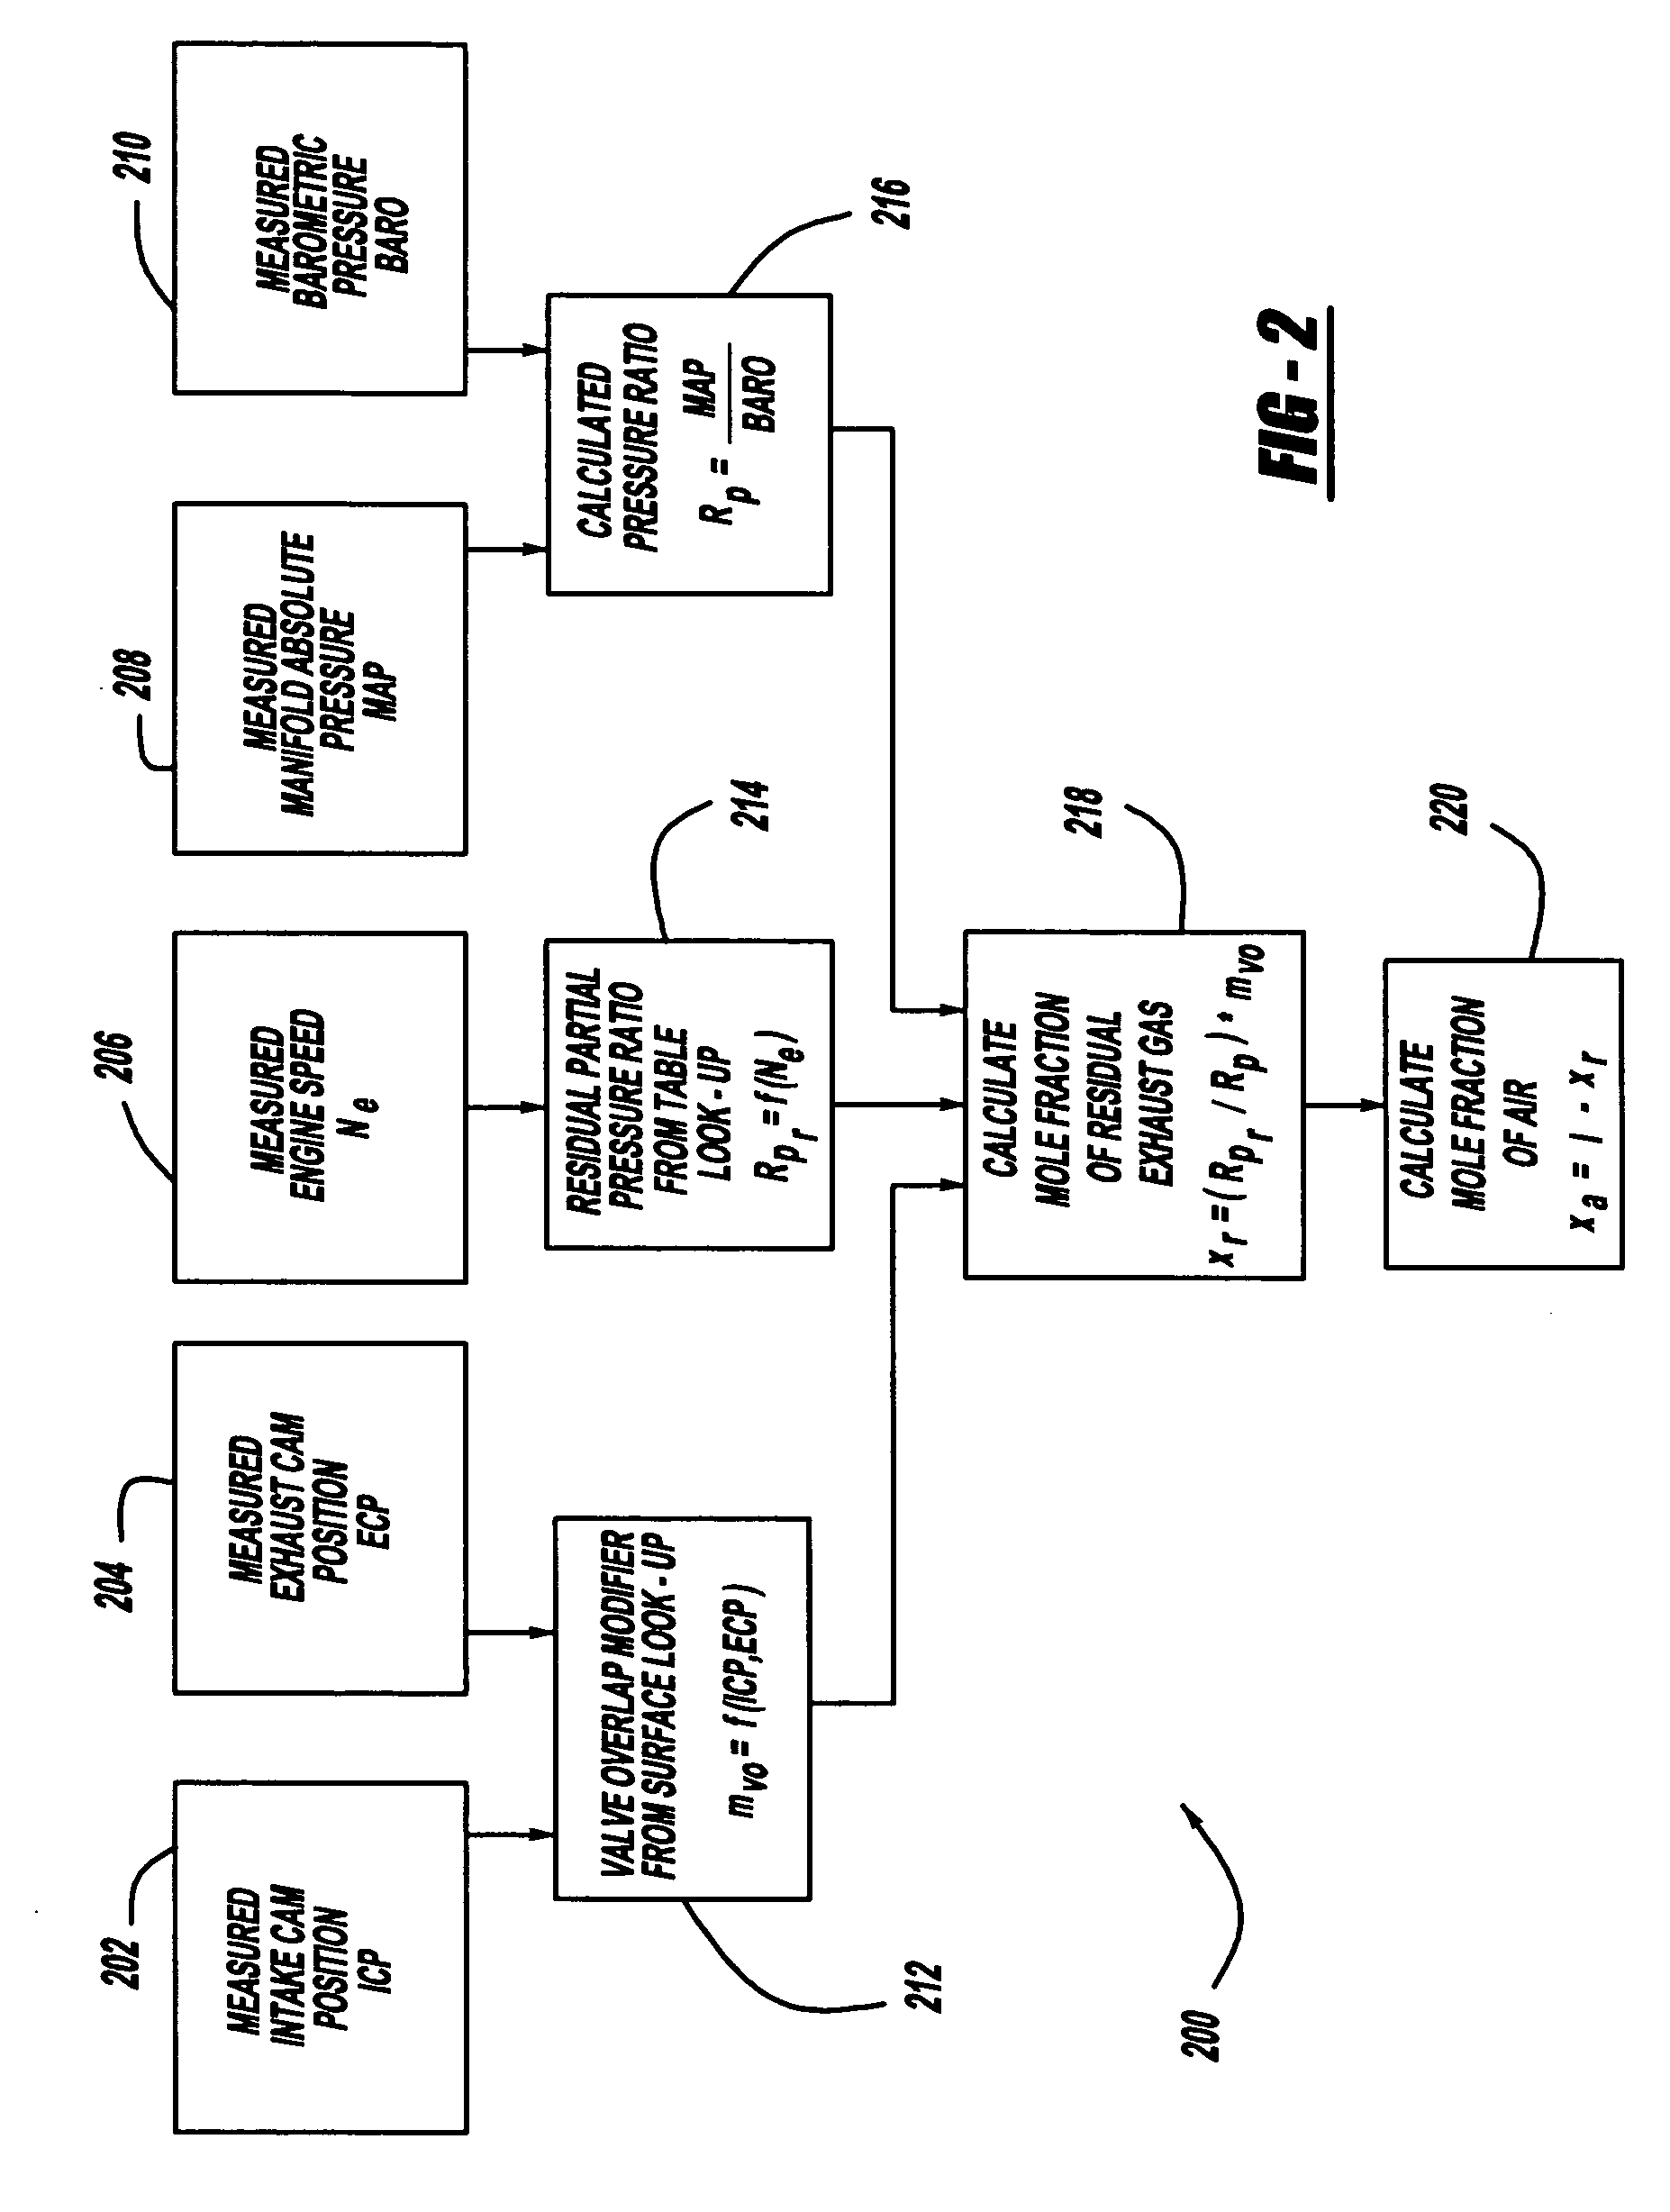 Method for controlling an operating condition of a vehicle engine